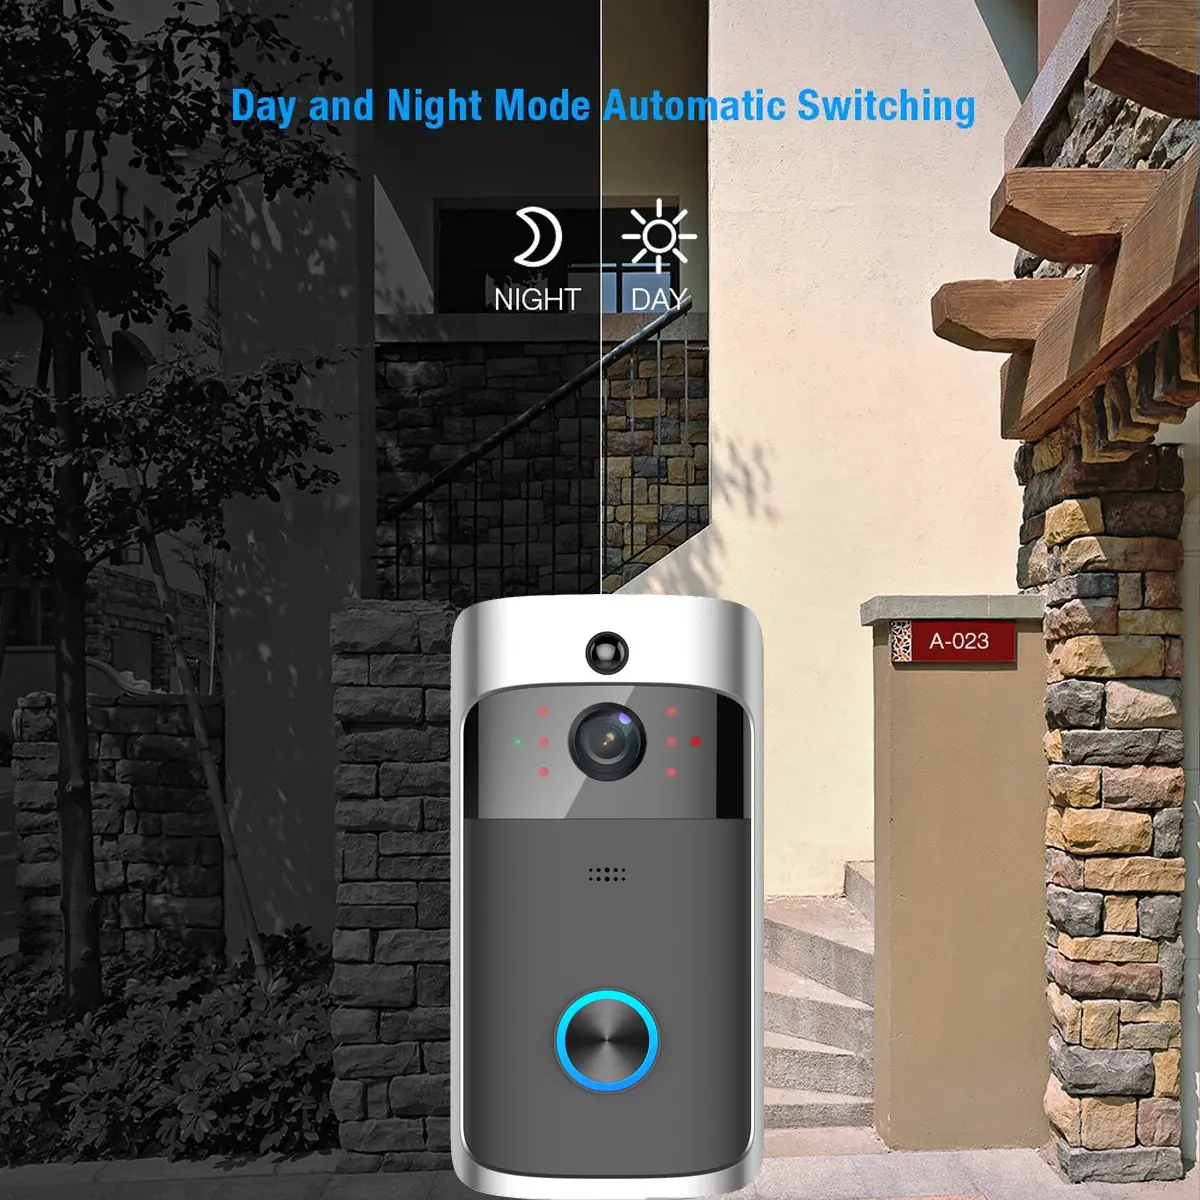 Smart Wireless DoorBell with Night Vision Home Security WiFi Smartphone Remote Video